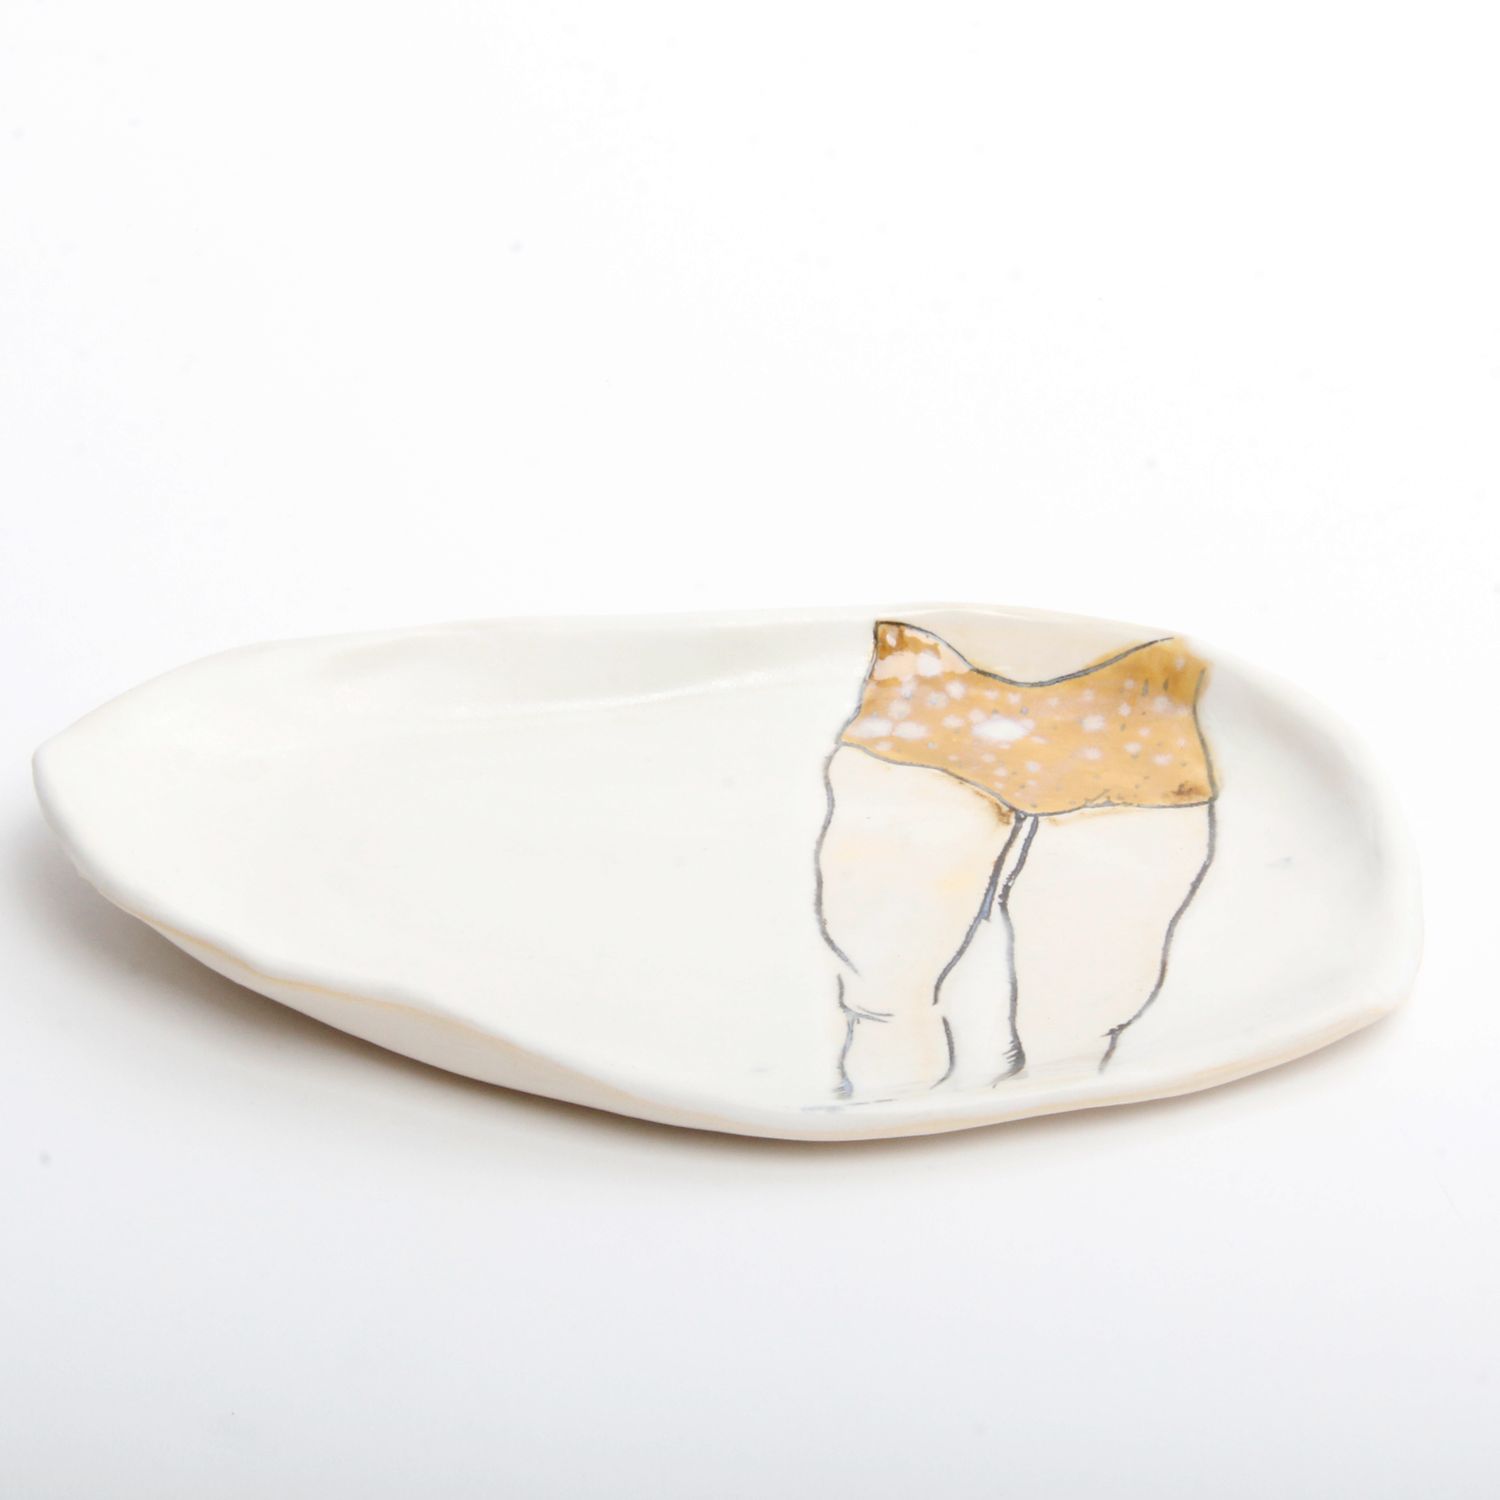 Lindsay Gravelle: Small Swimmer Plate Product Image 2 of 3